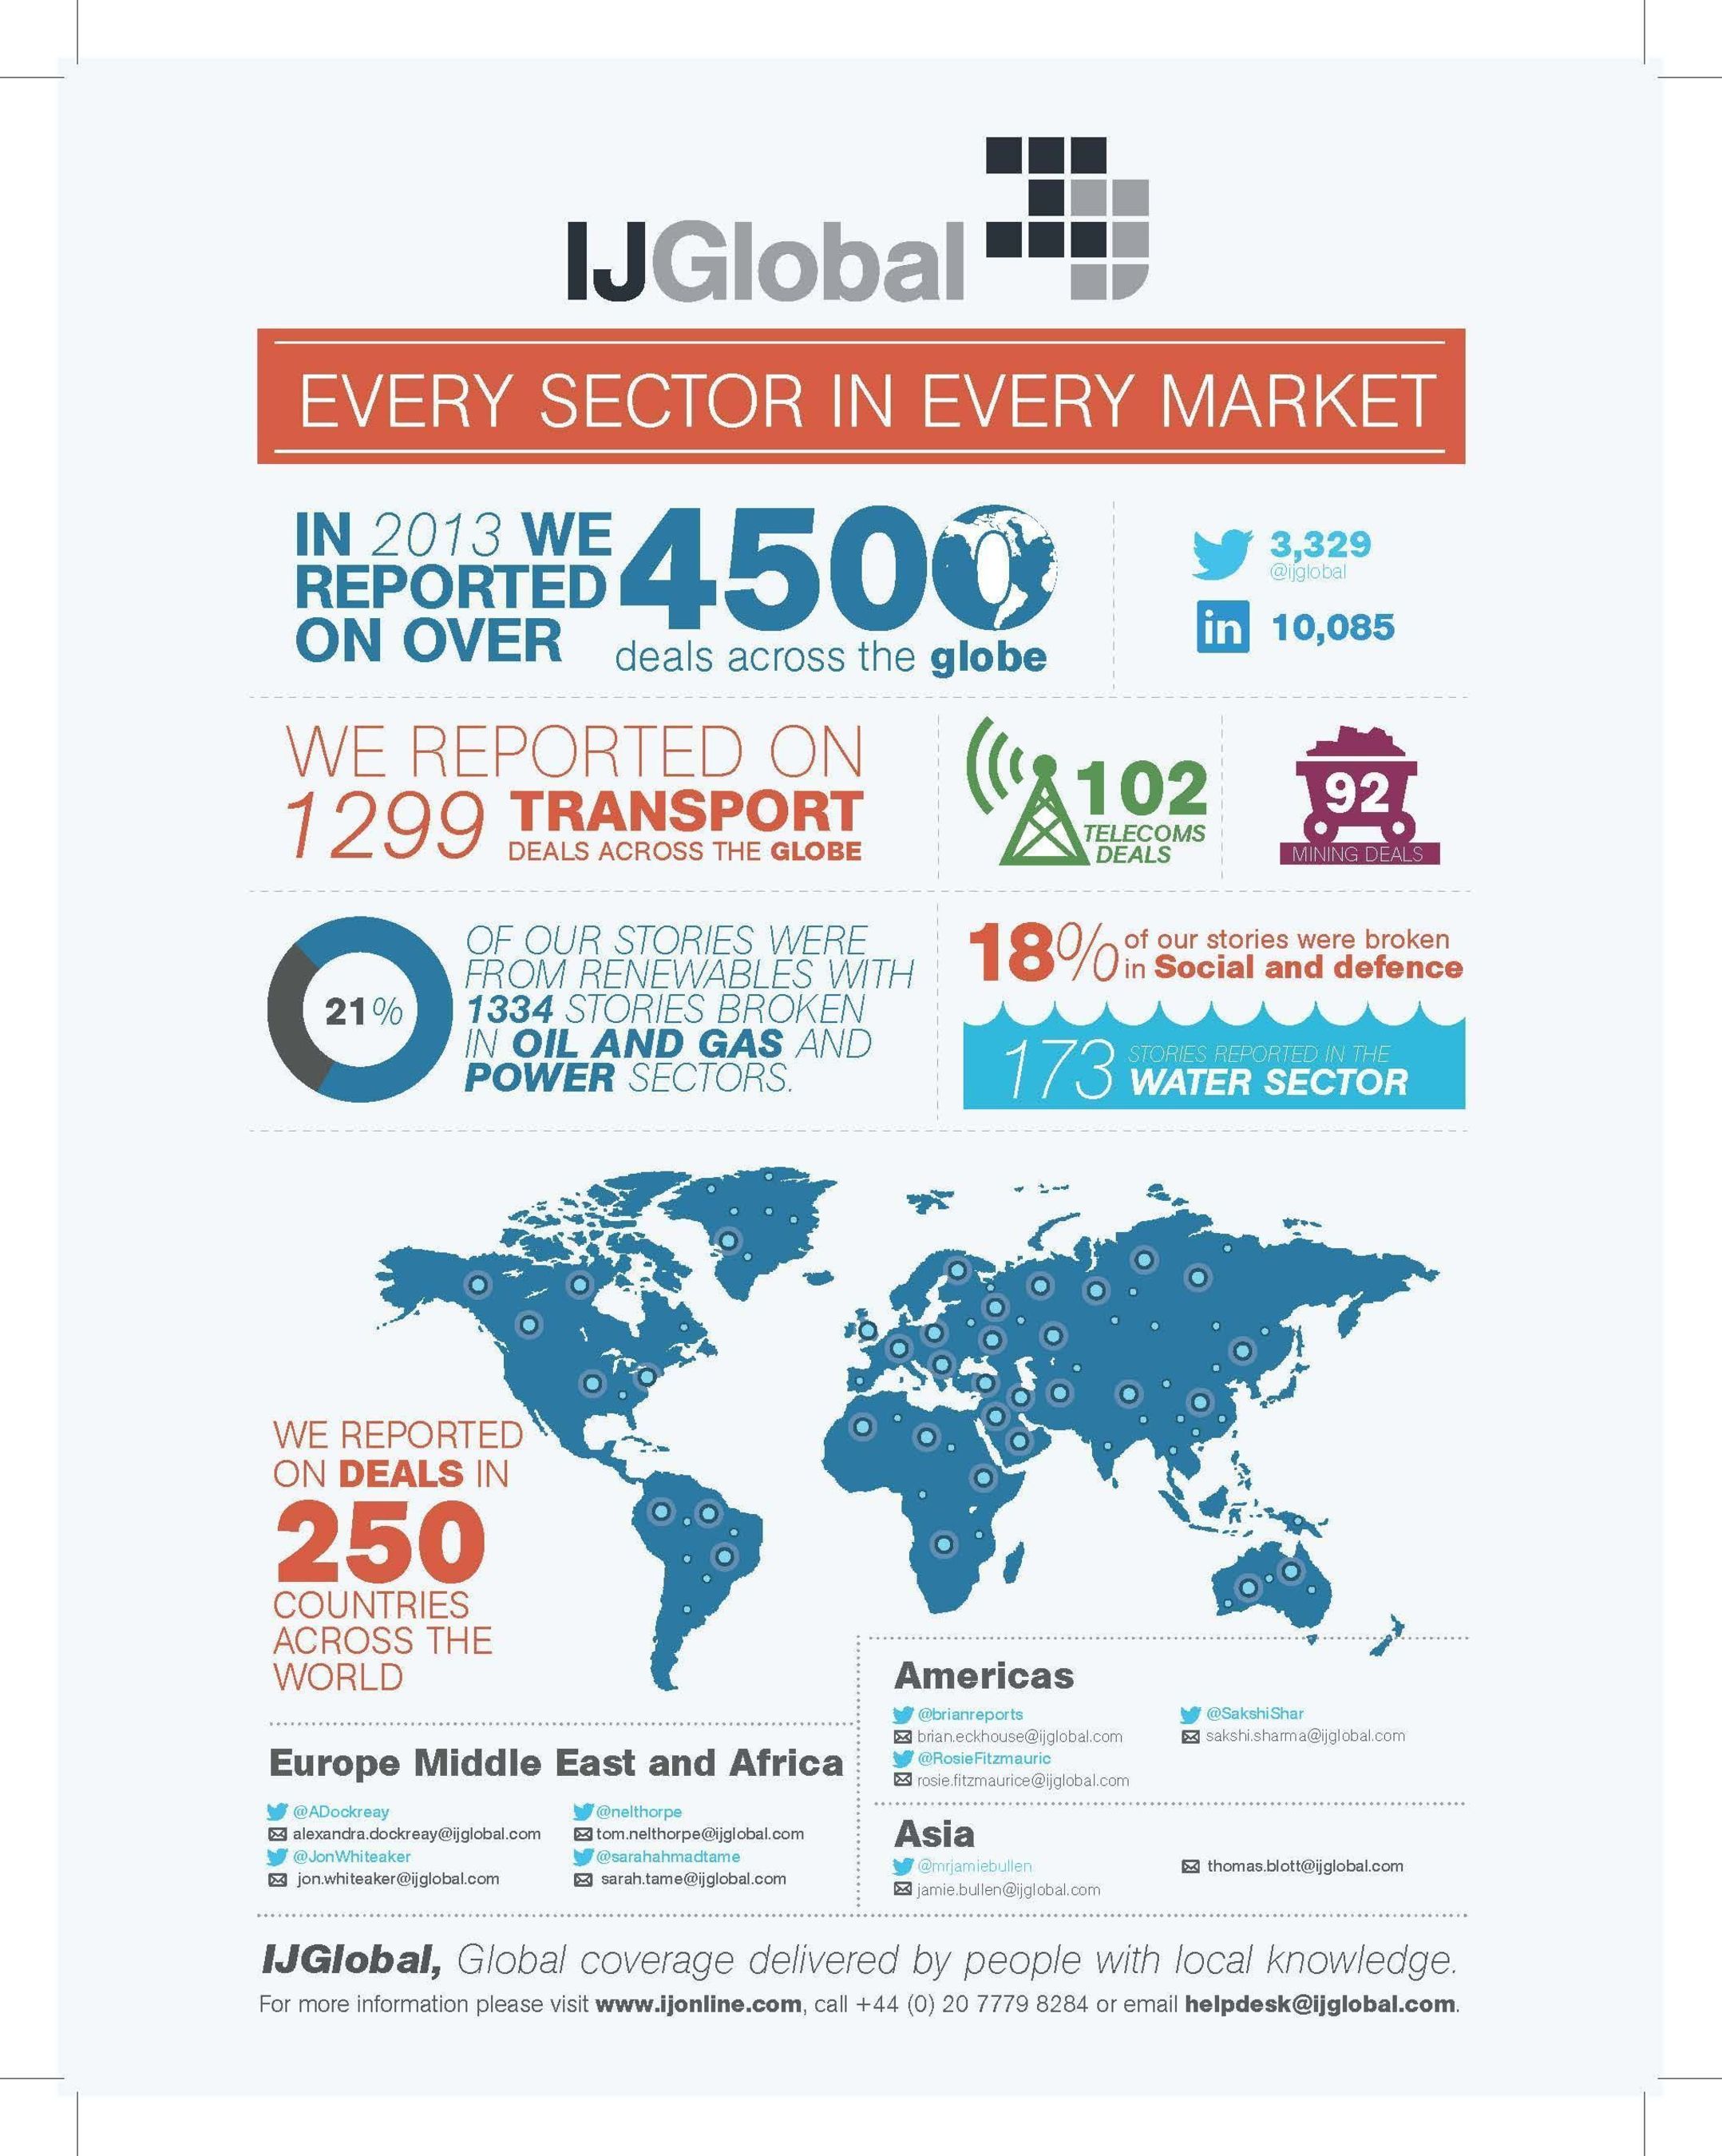 Infrastructure Journal has joined forces with Project Finance to become IJGlobal. IJGlobal brings together the influence and insight of Infrastructure Journal with the intelligence and authority of Project Finance. All supported by the weight of experience that comes from covering this sector since 1979. Weâ€™re also creating the largest and most accurate deal database available, together with an events portfolio to match. With people on the ground in every region, we have the inside track on projects and deals when and where they happen. (PRNewsFoto/IJGlobal)